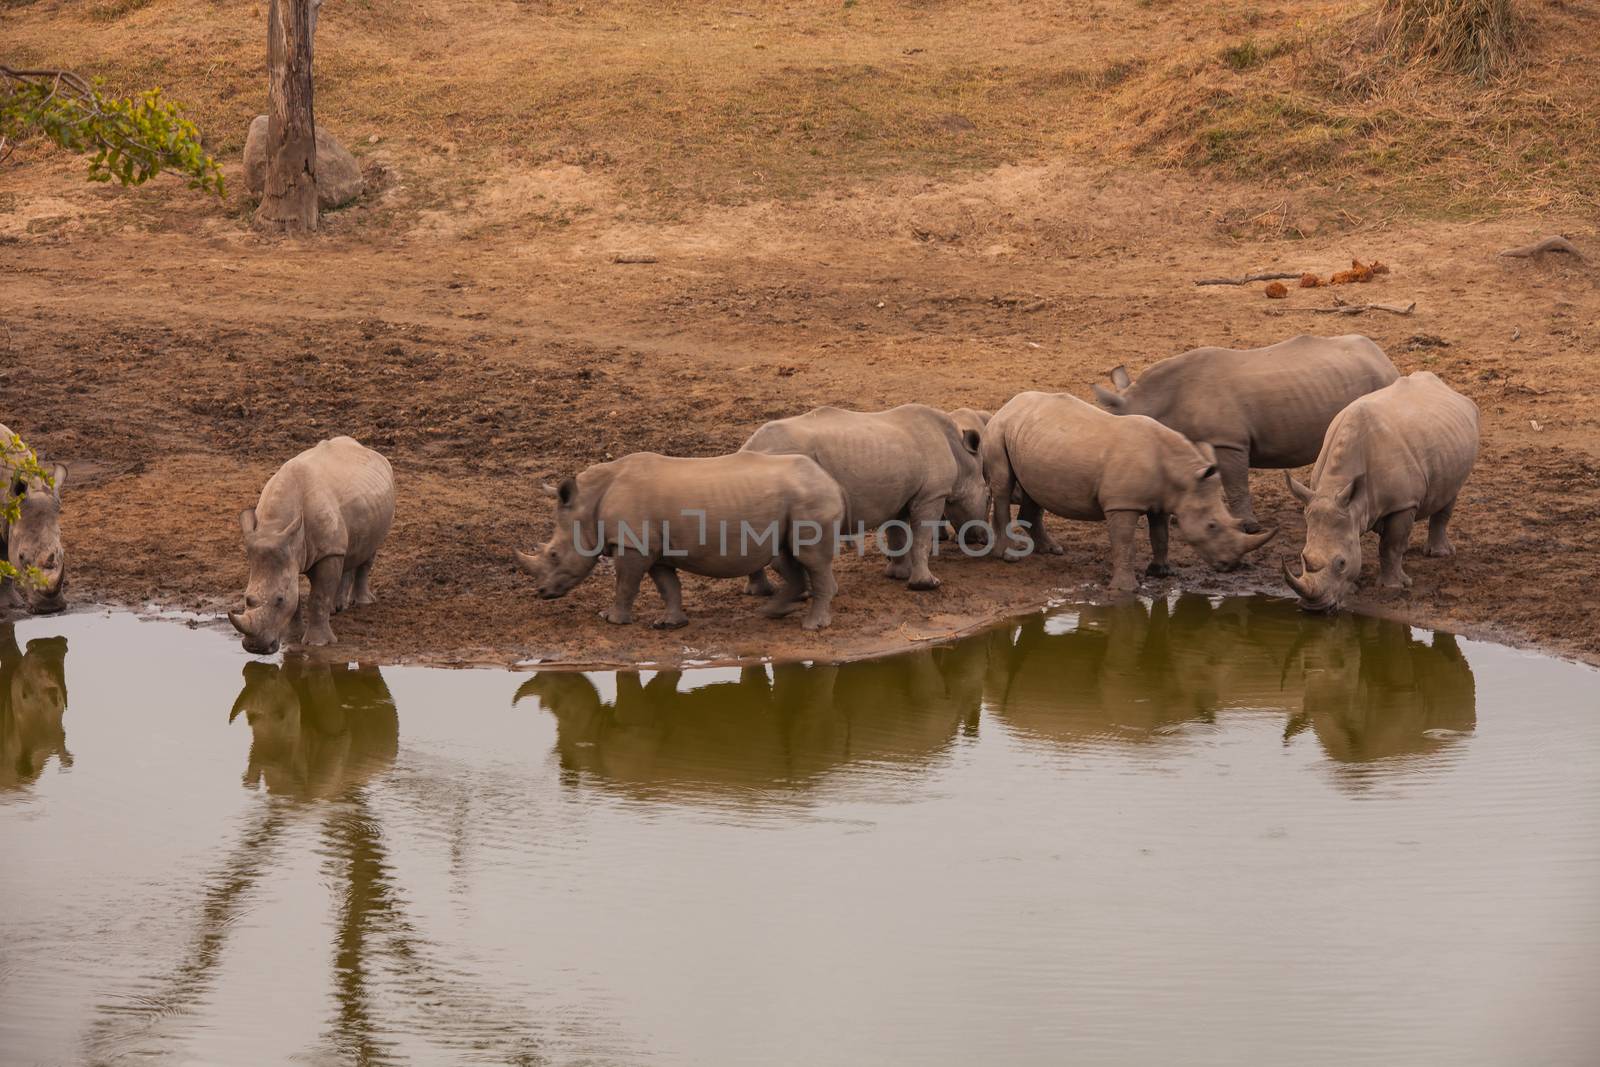 A group of white, or square lipped rhino (Ceratotherium simum) at a waterhole in Kruger National Park, South Africa.